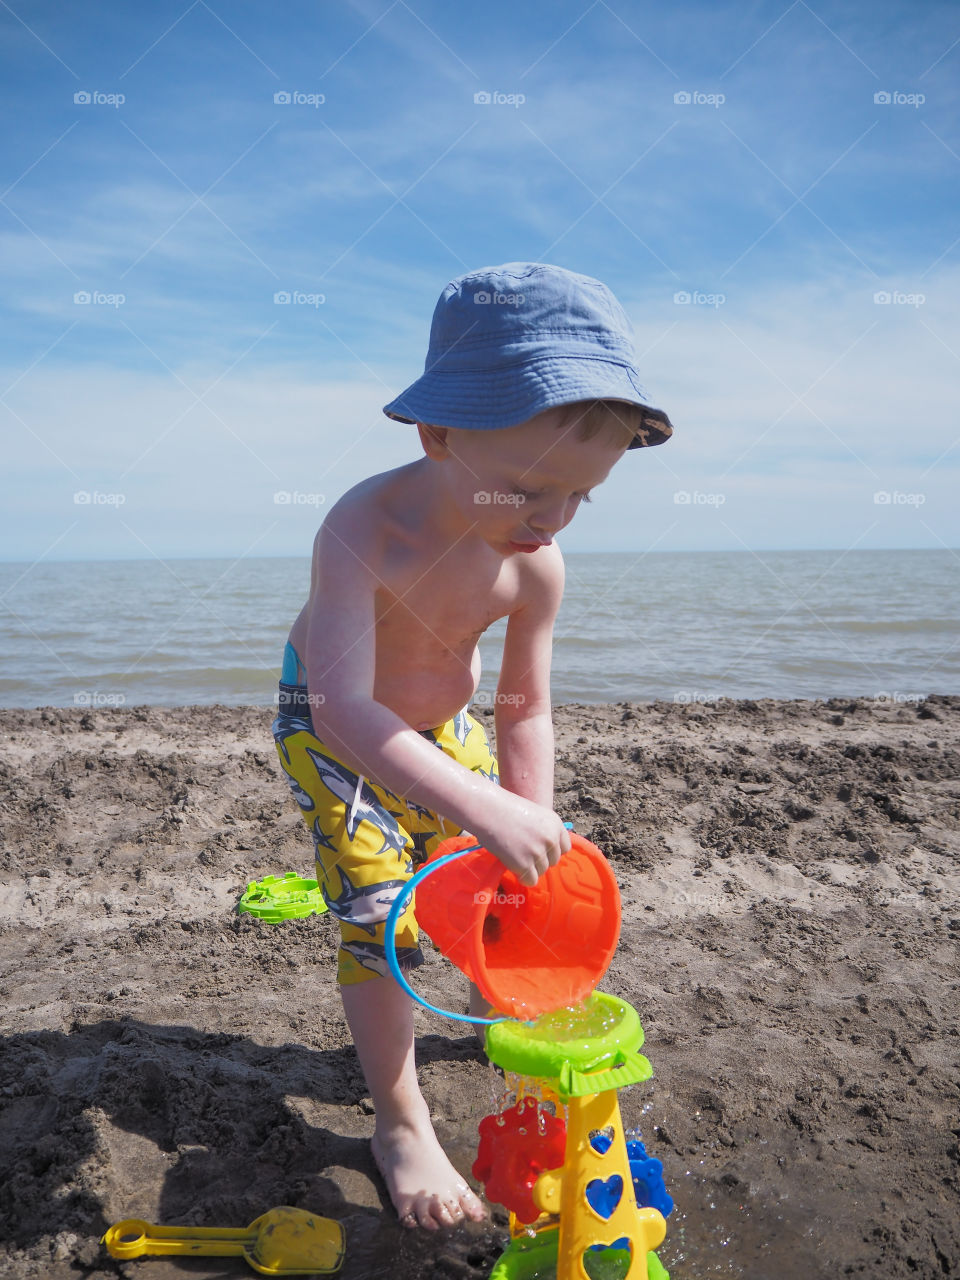 Toddler boy pouring water into his beach toy.